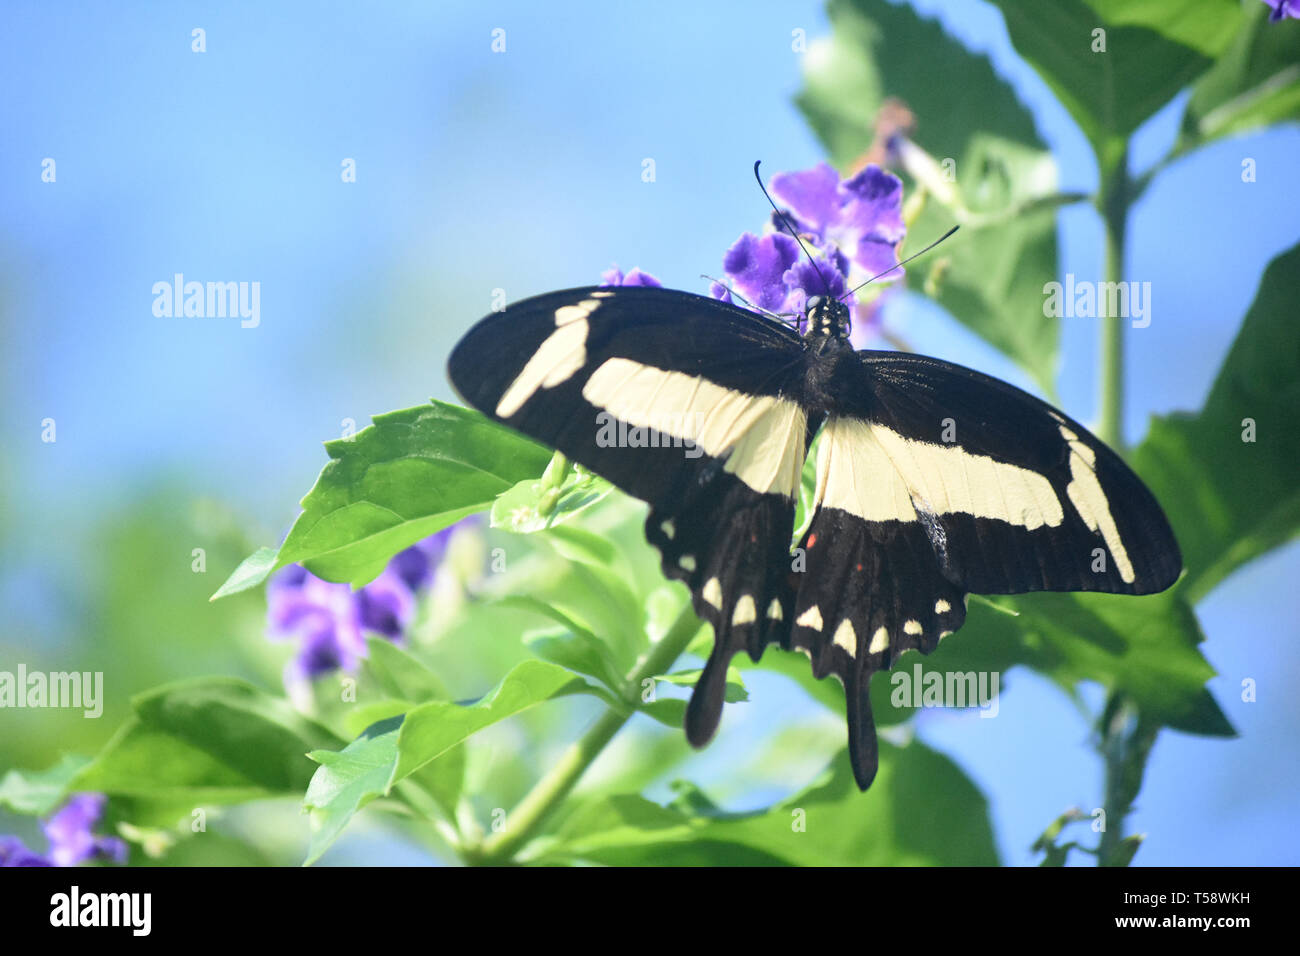 Wings wide open on a large yellow and black swallowtail butterfly. Stock Photo